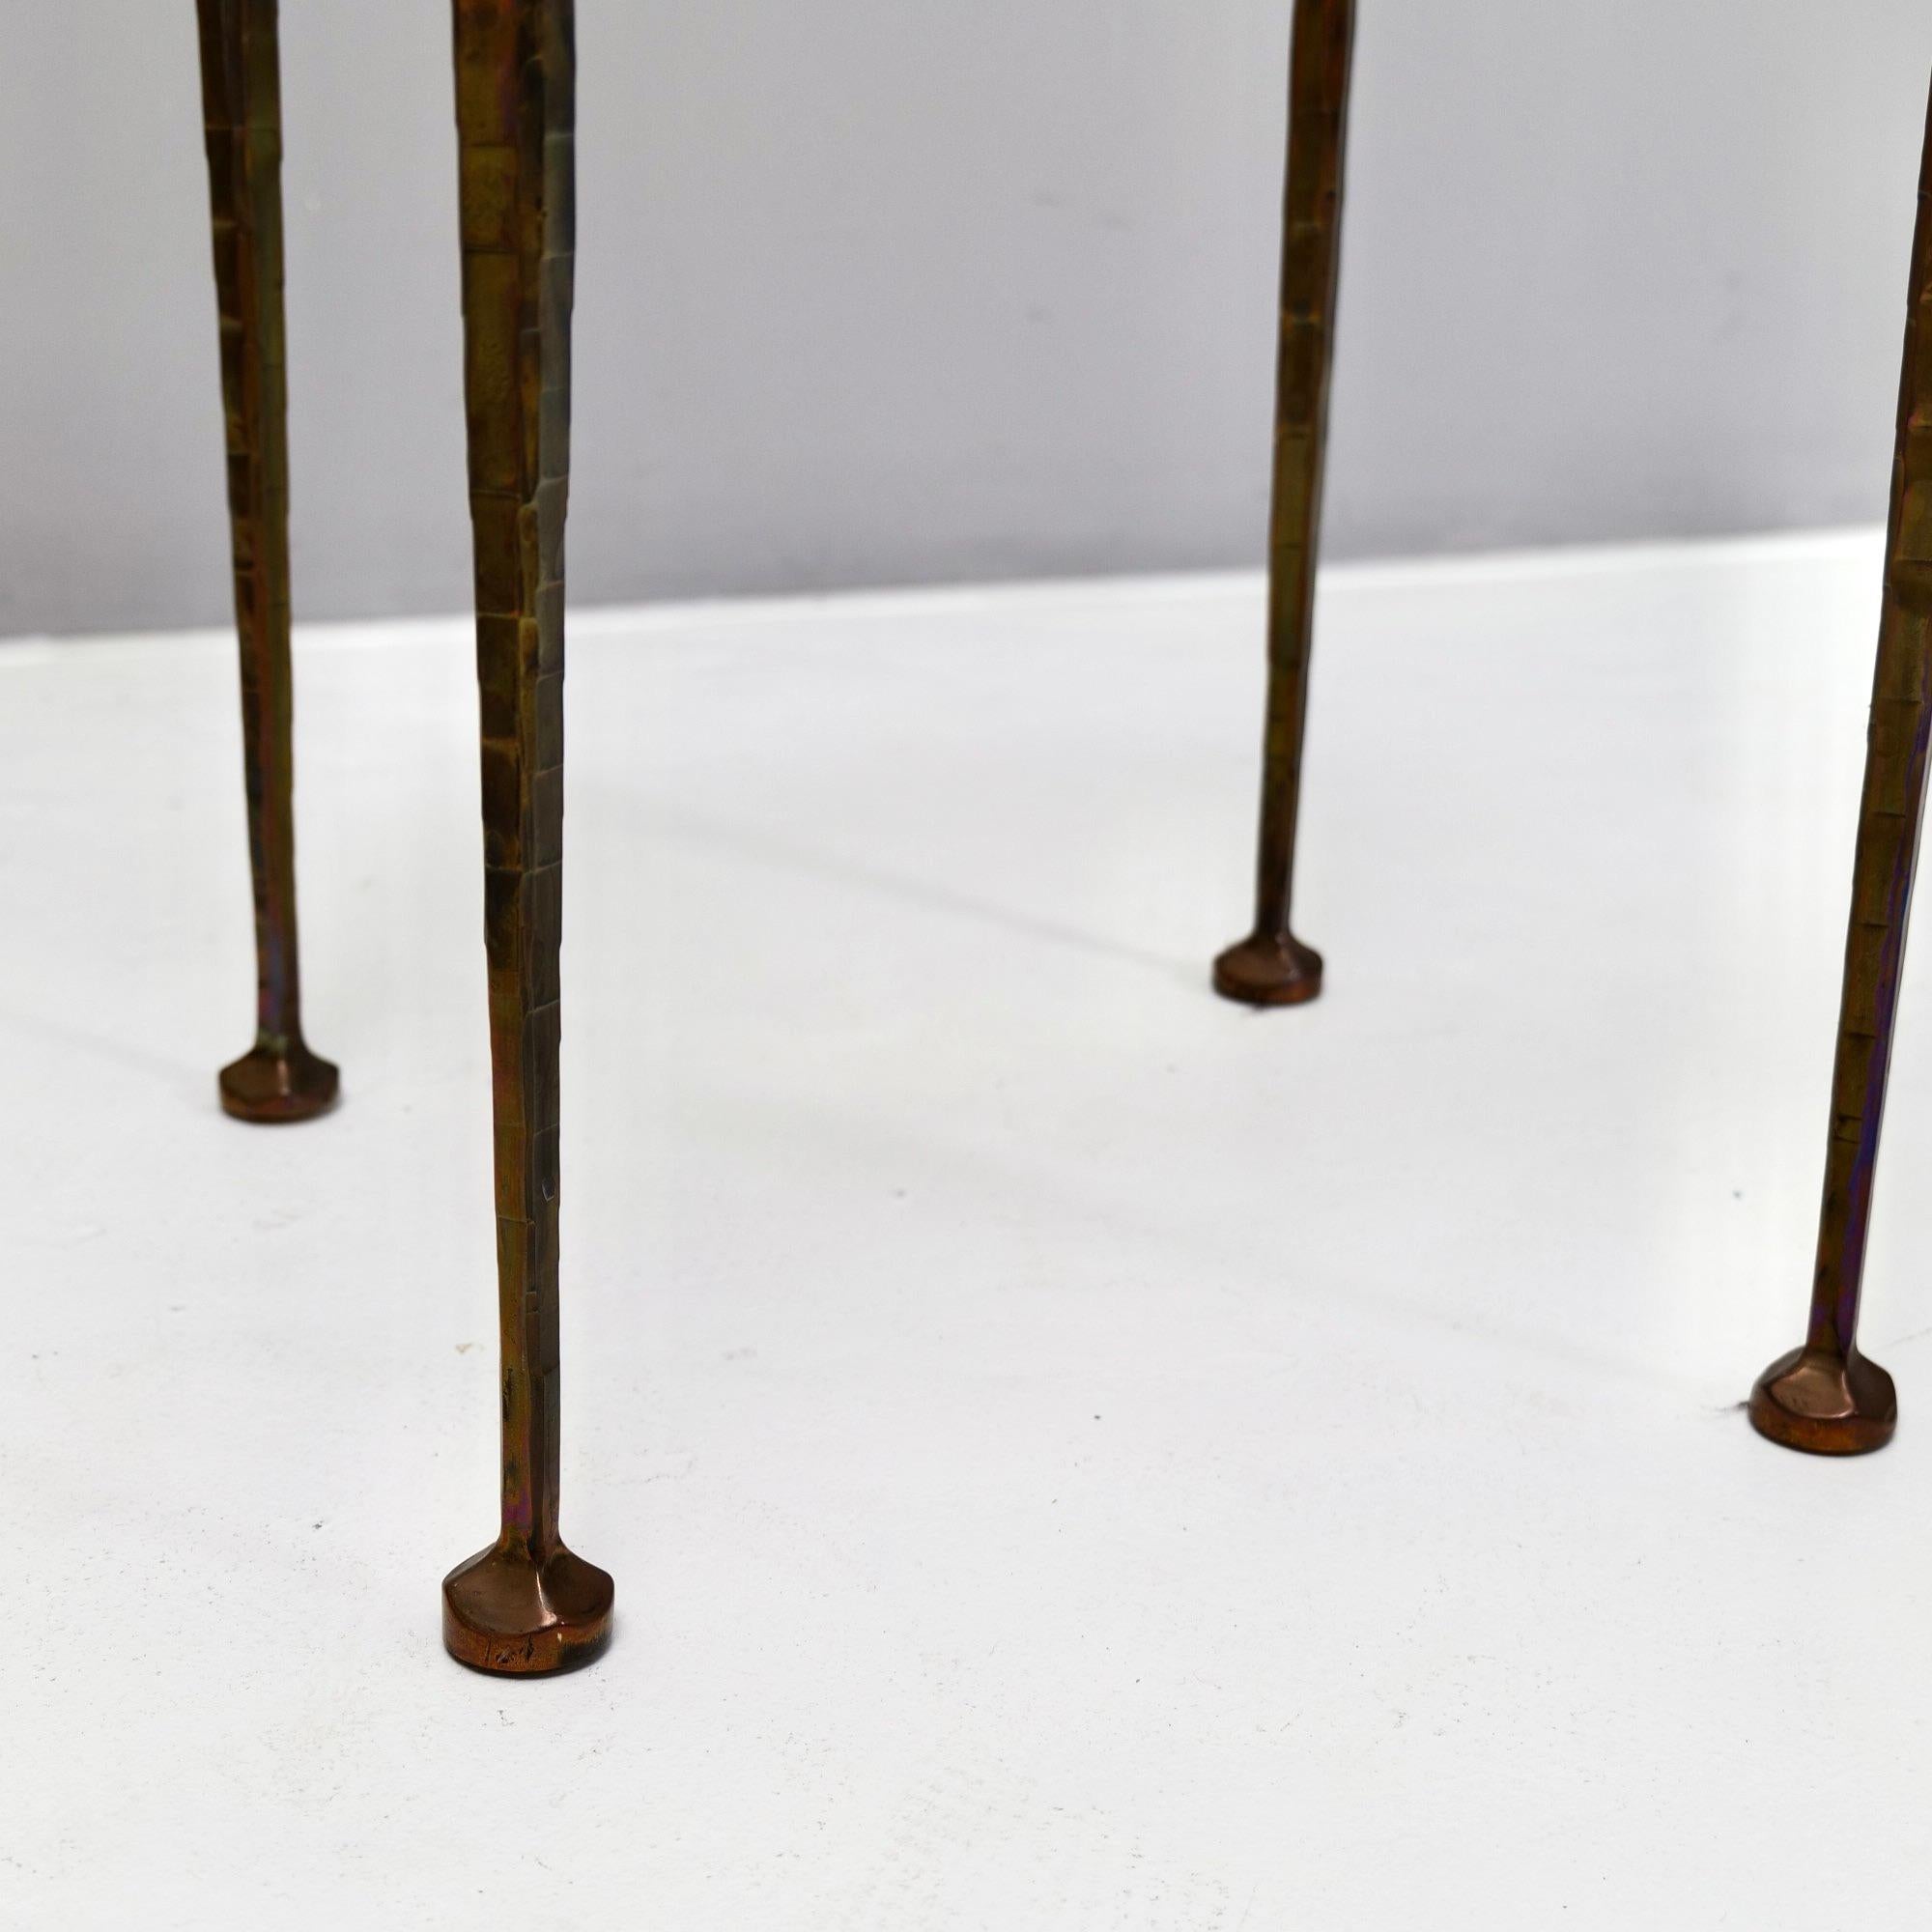 Brutalist square forged bronze table with cast glass Lothar klute attr. - 1980s brutalist For Sale